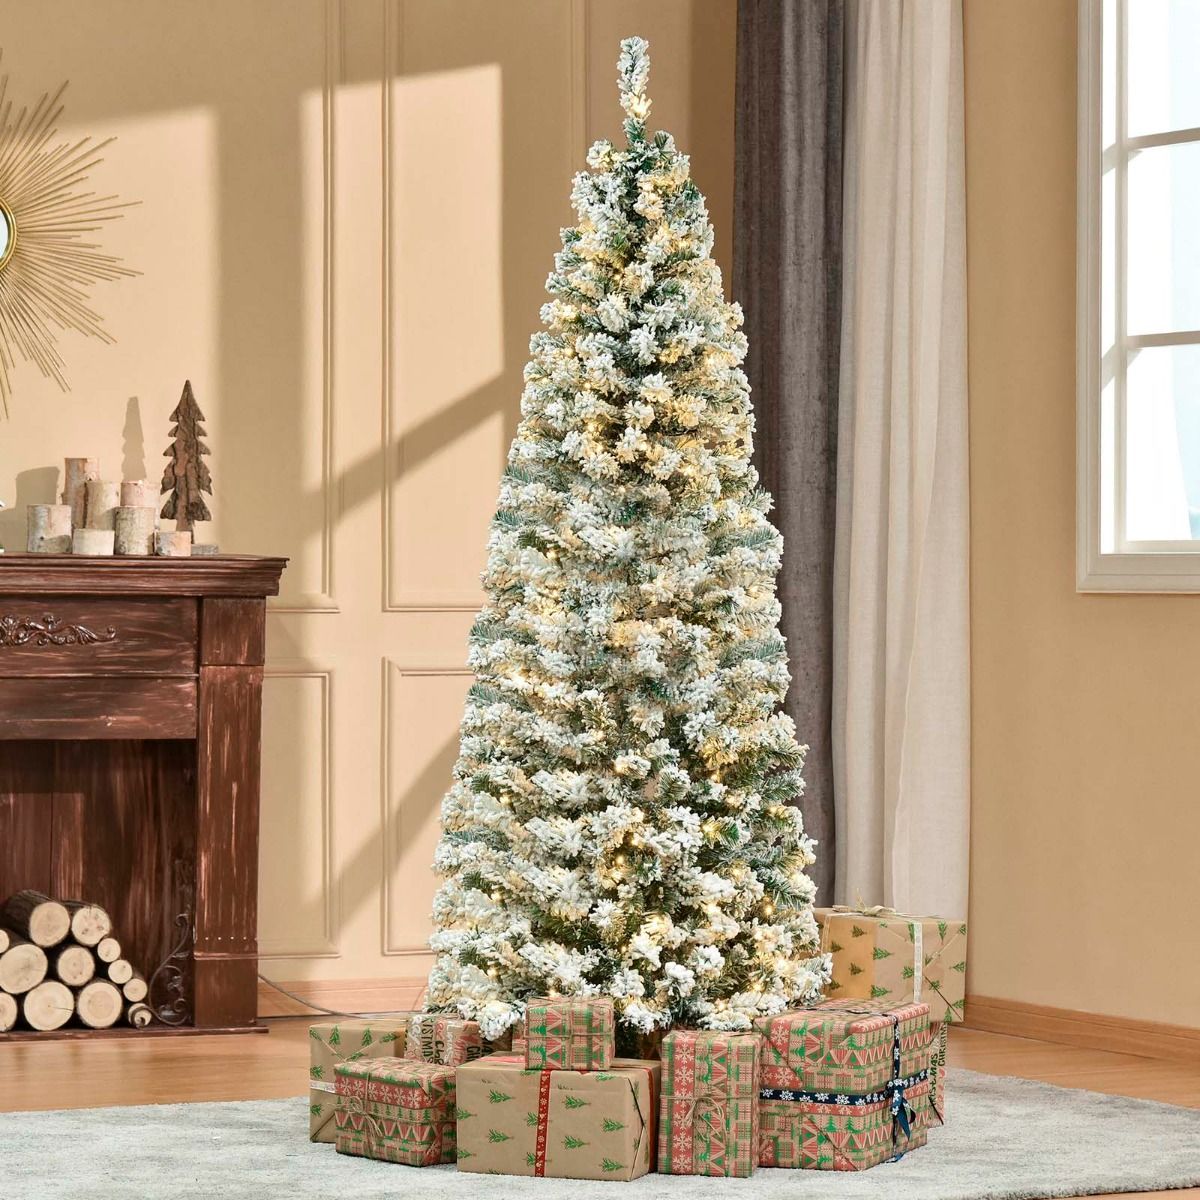 OHS Pre-Lit Artificial Snow Flocked Christmas Tree With Warm LED Lights, Green/White - 6ft